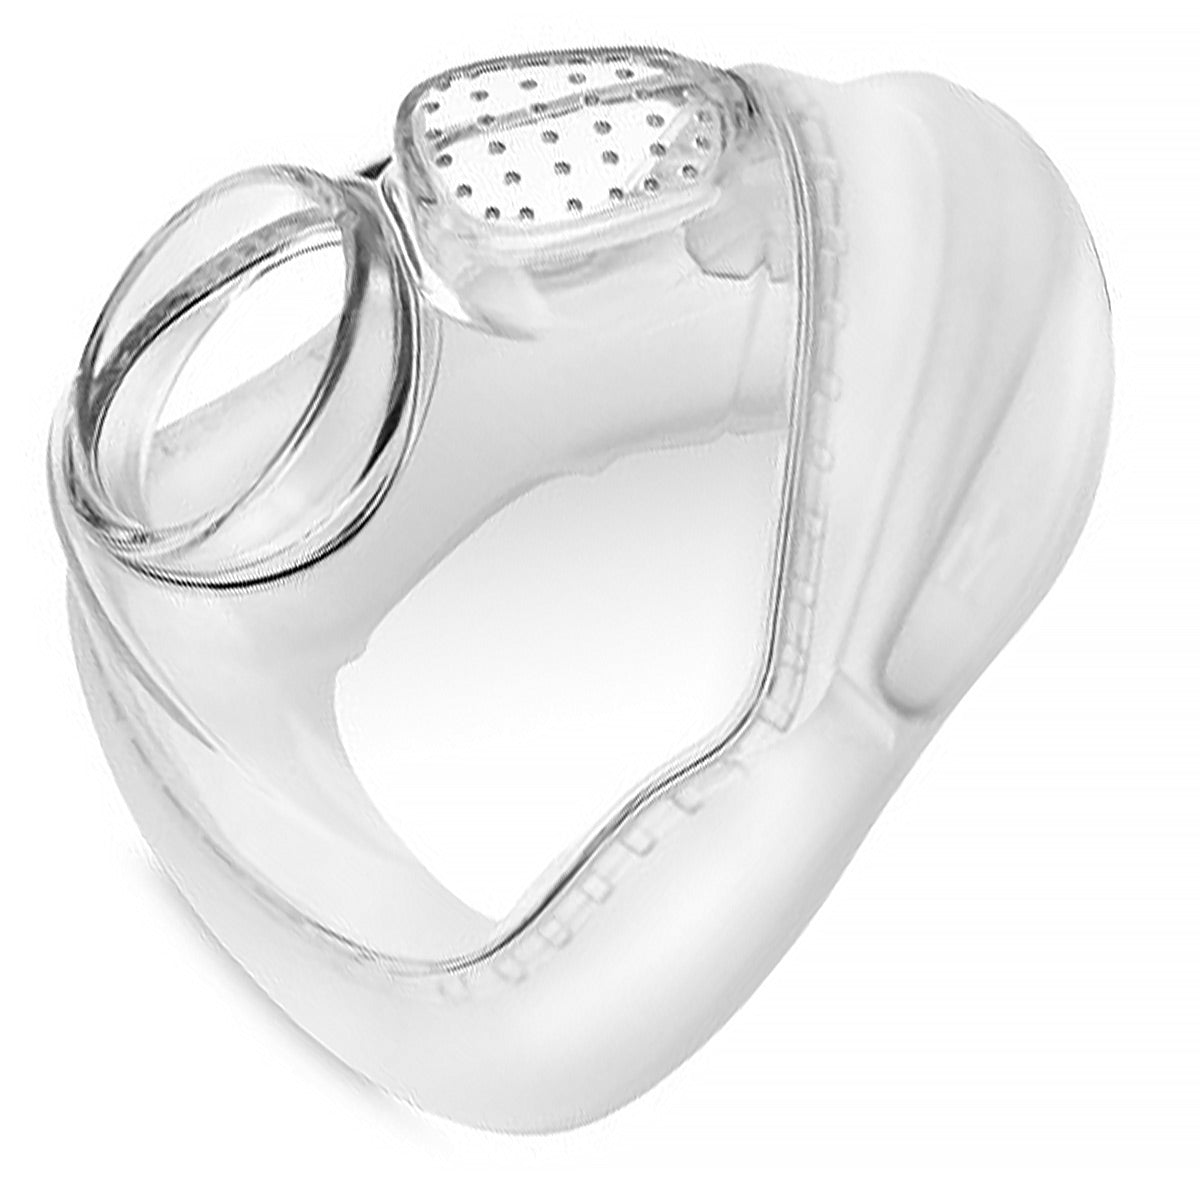 F&P Simplus Full Face CPAP/BiPAP Mask FitPack with Headgear — CPAPXchange